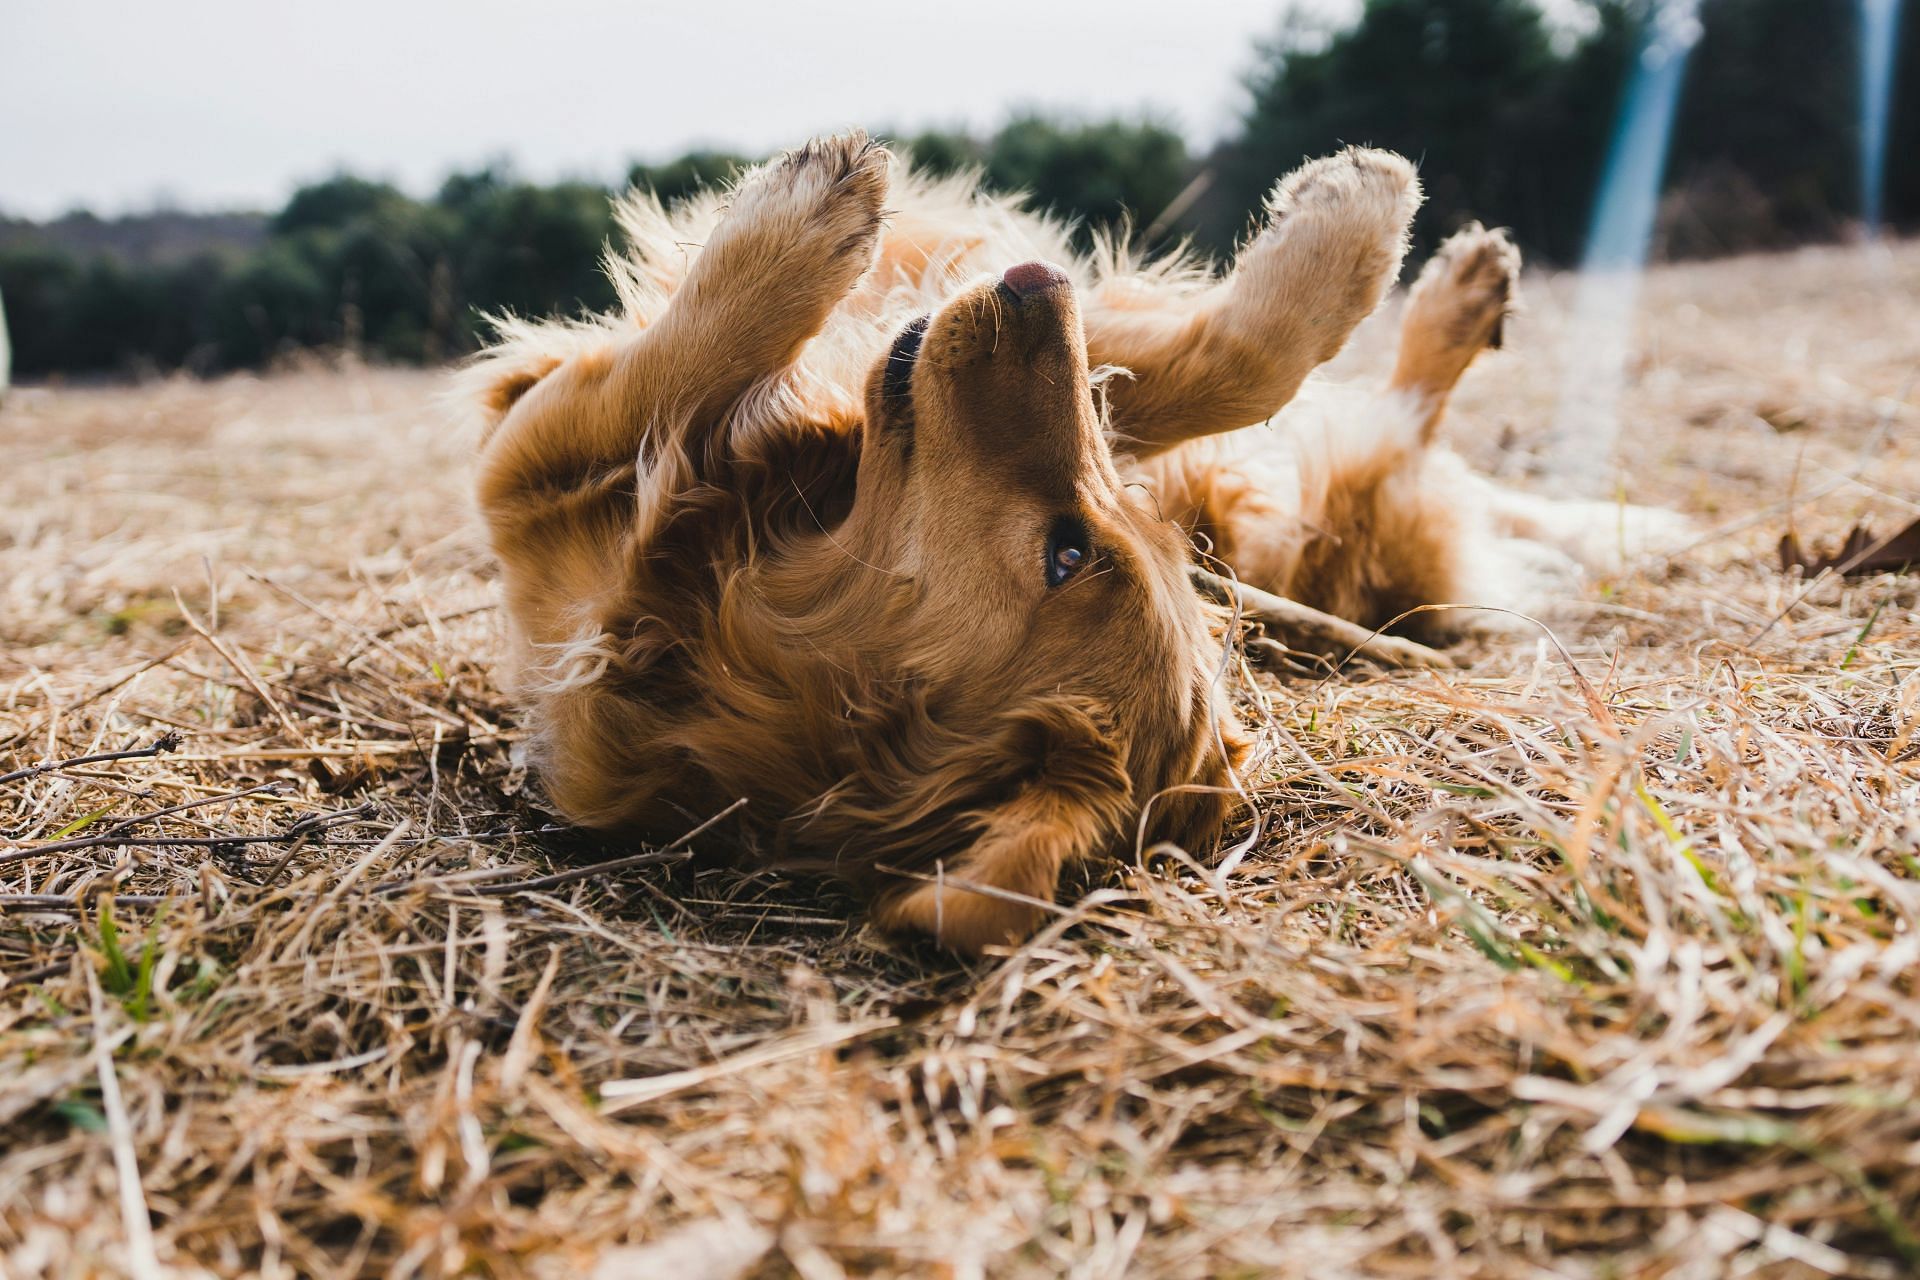 Can dogs increase physical activity ? (Image by Michael Oxendine/Unsplash)